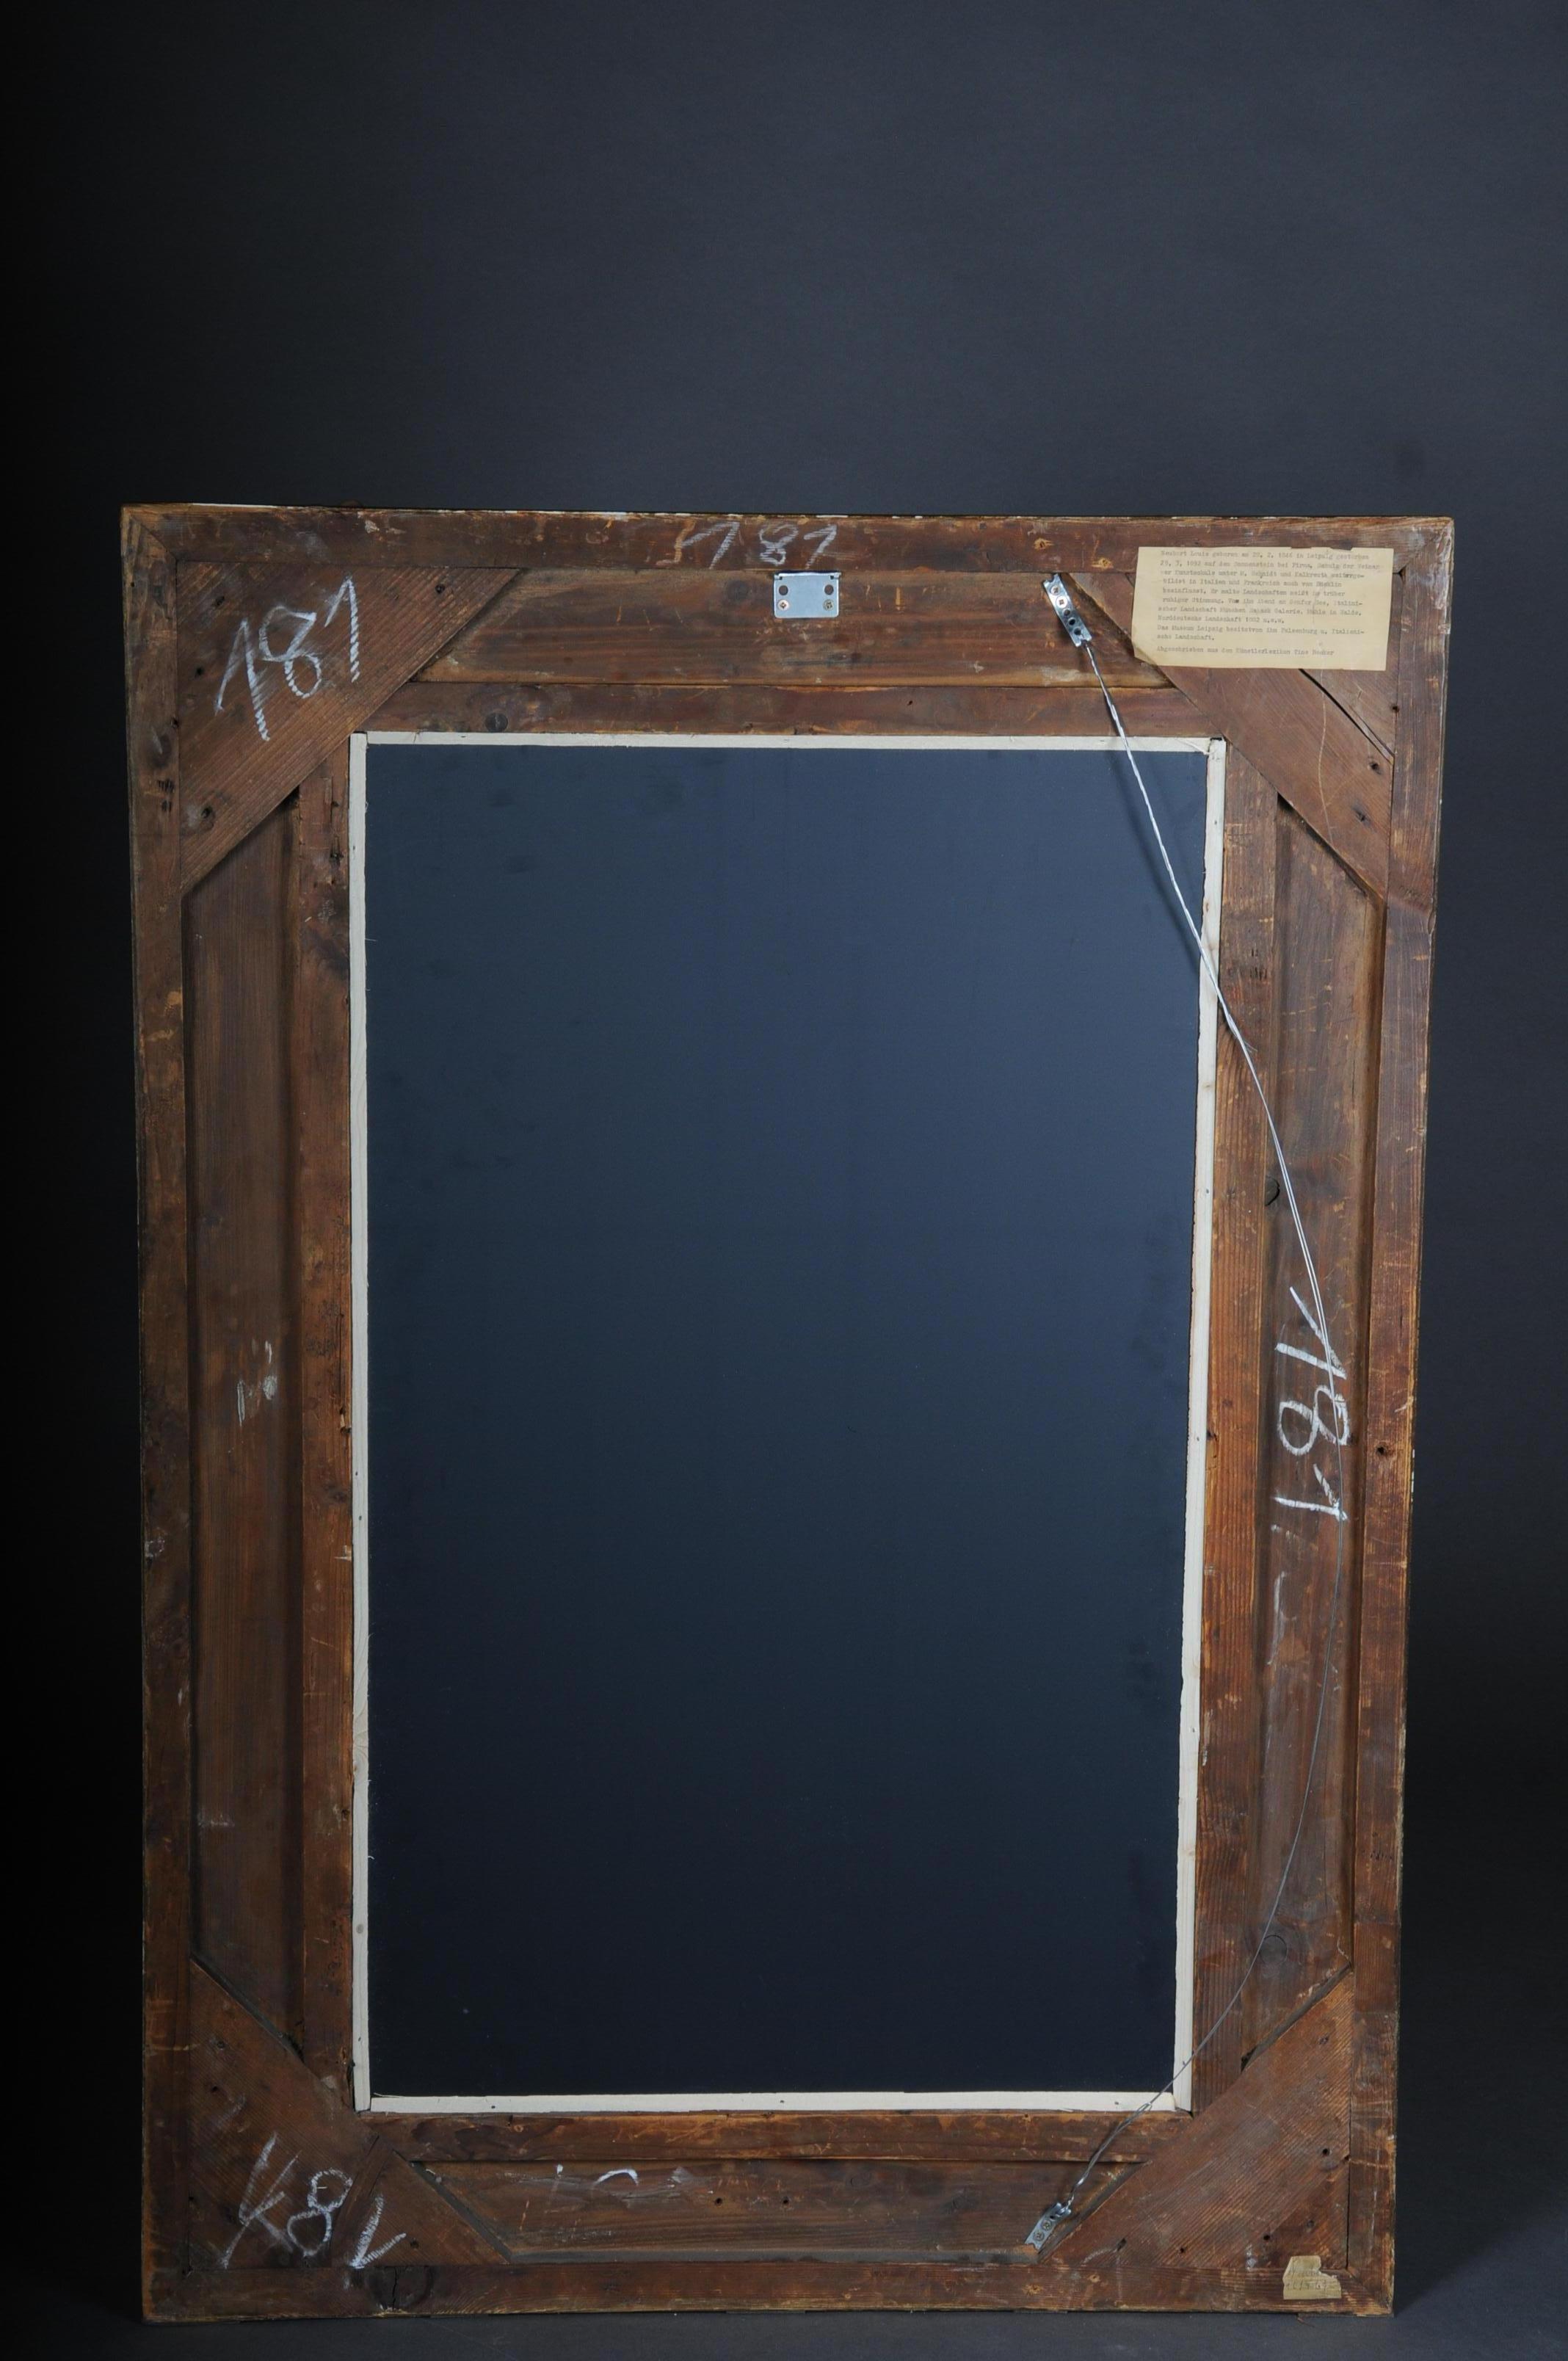 Late 19th Century 19th Century Ornate Wall Mirror Gold Frame, Gilded, circa 1870 For Sale